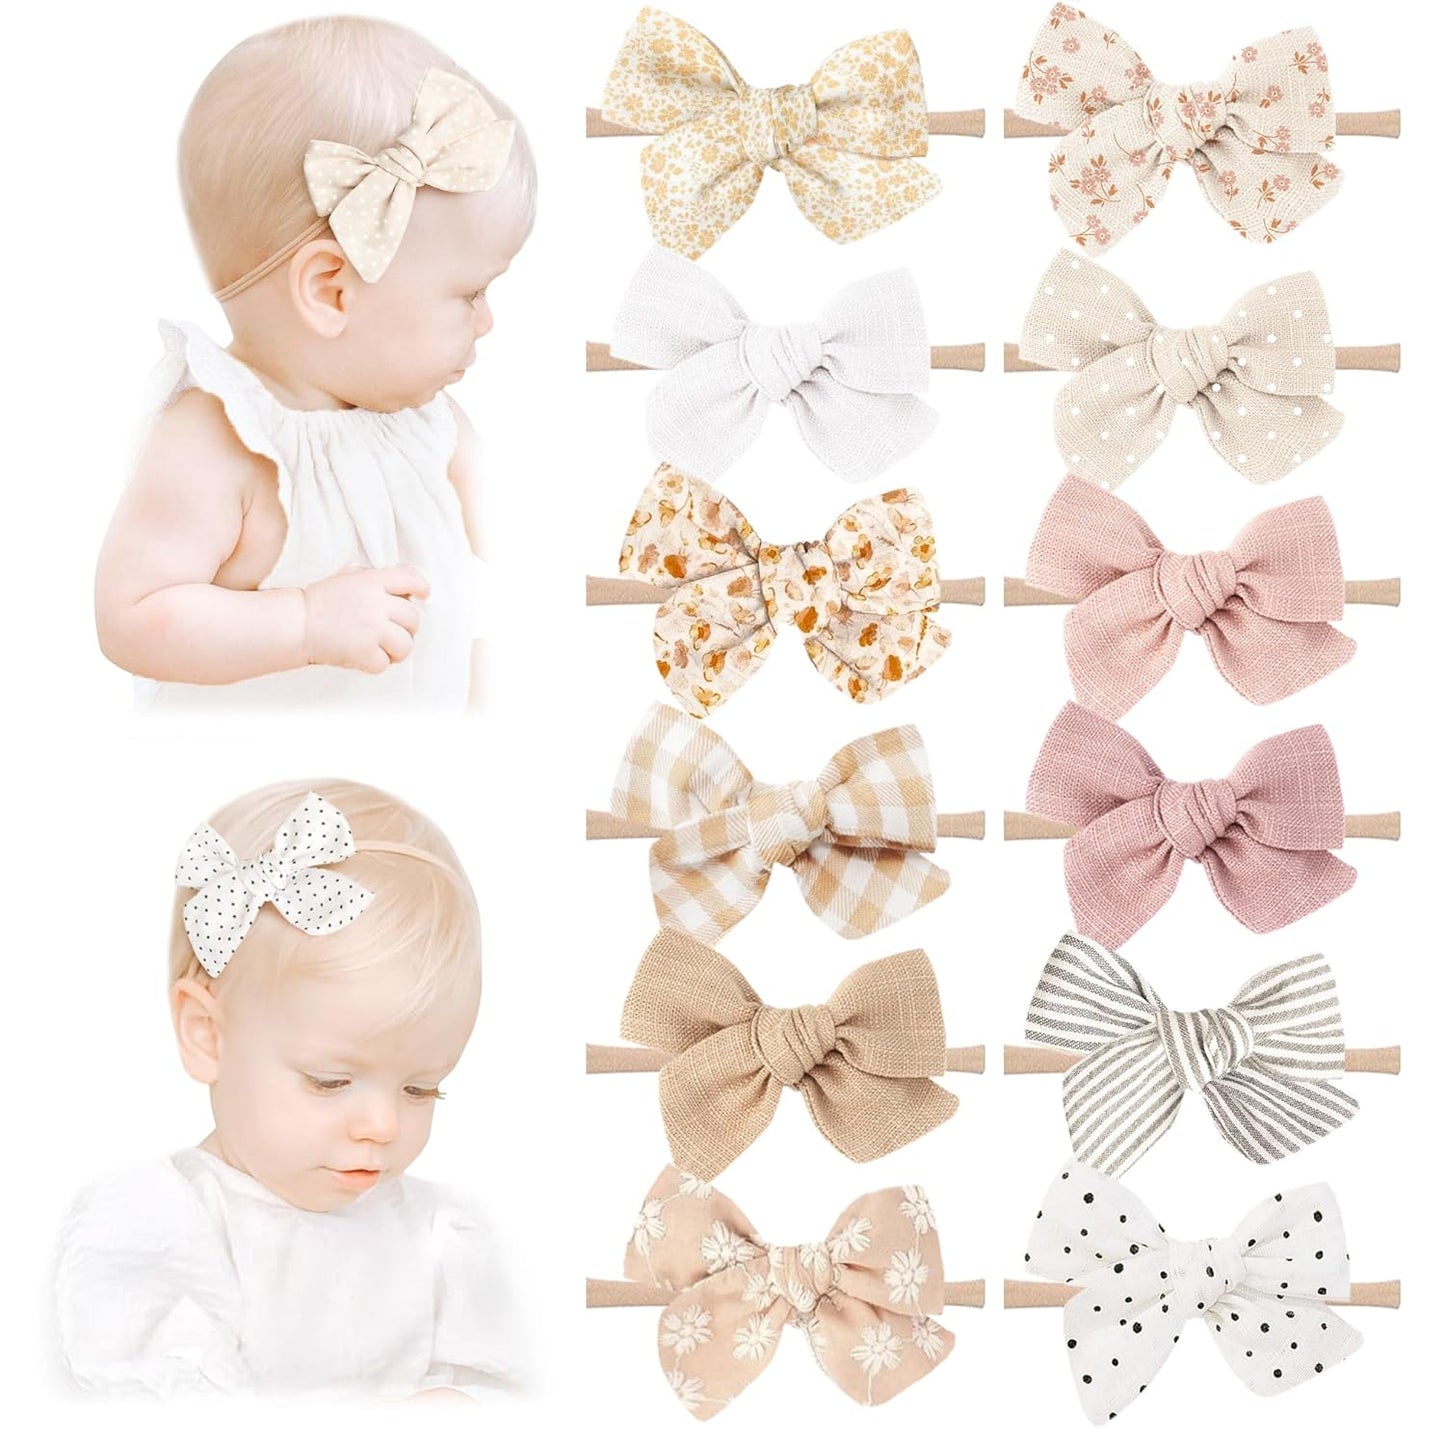 Niceye Baby Girl Bows and Headbands, 12 Packs of Stretchy Nylon Hairbands Hair Bows for Newborns, Infants, Toddlers - Handmade Baby Hair Accessories for Girls